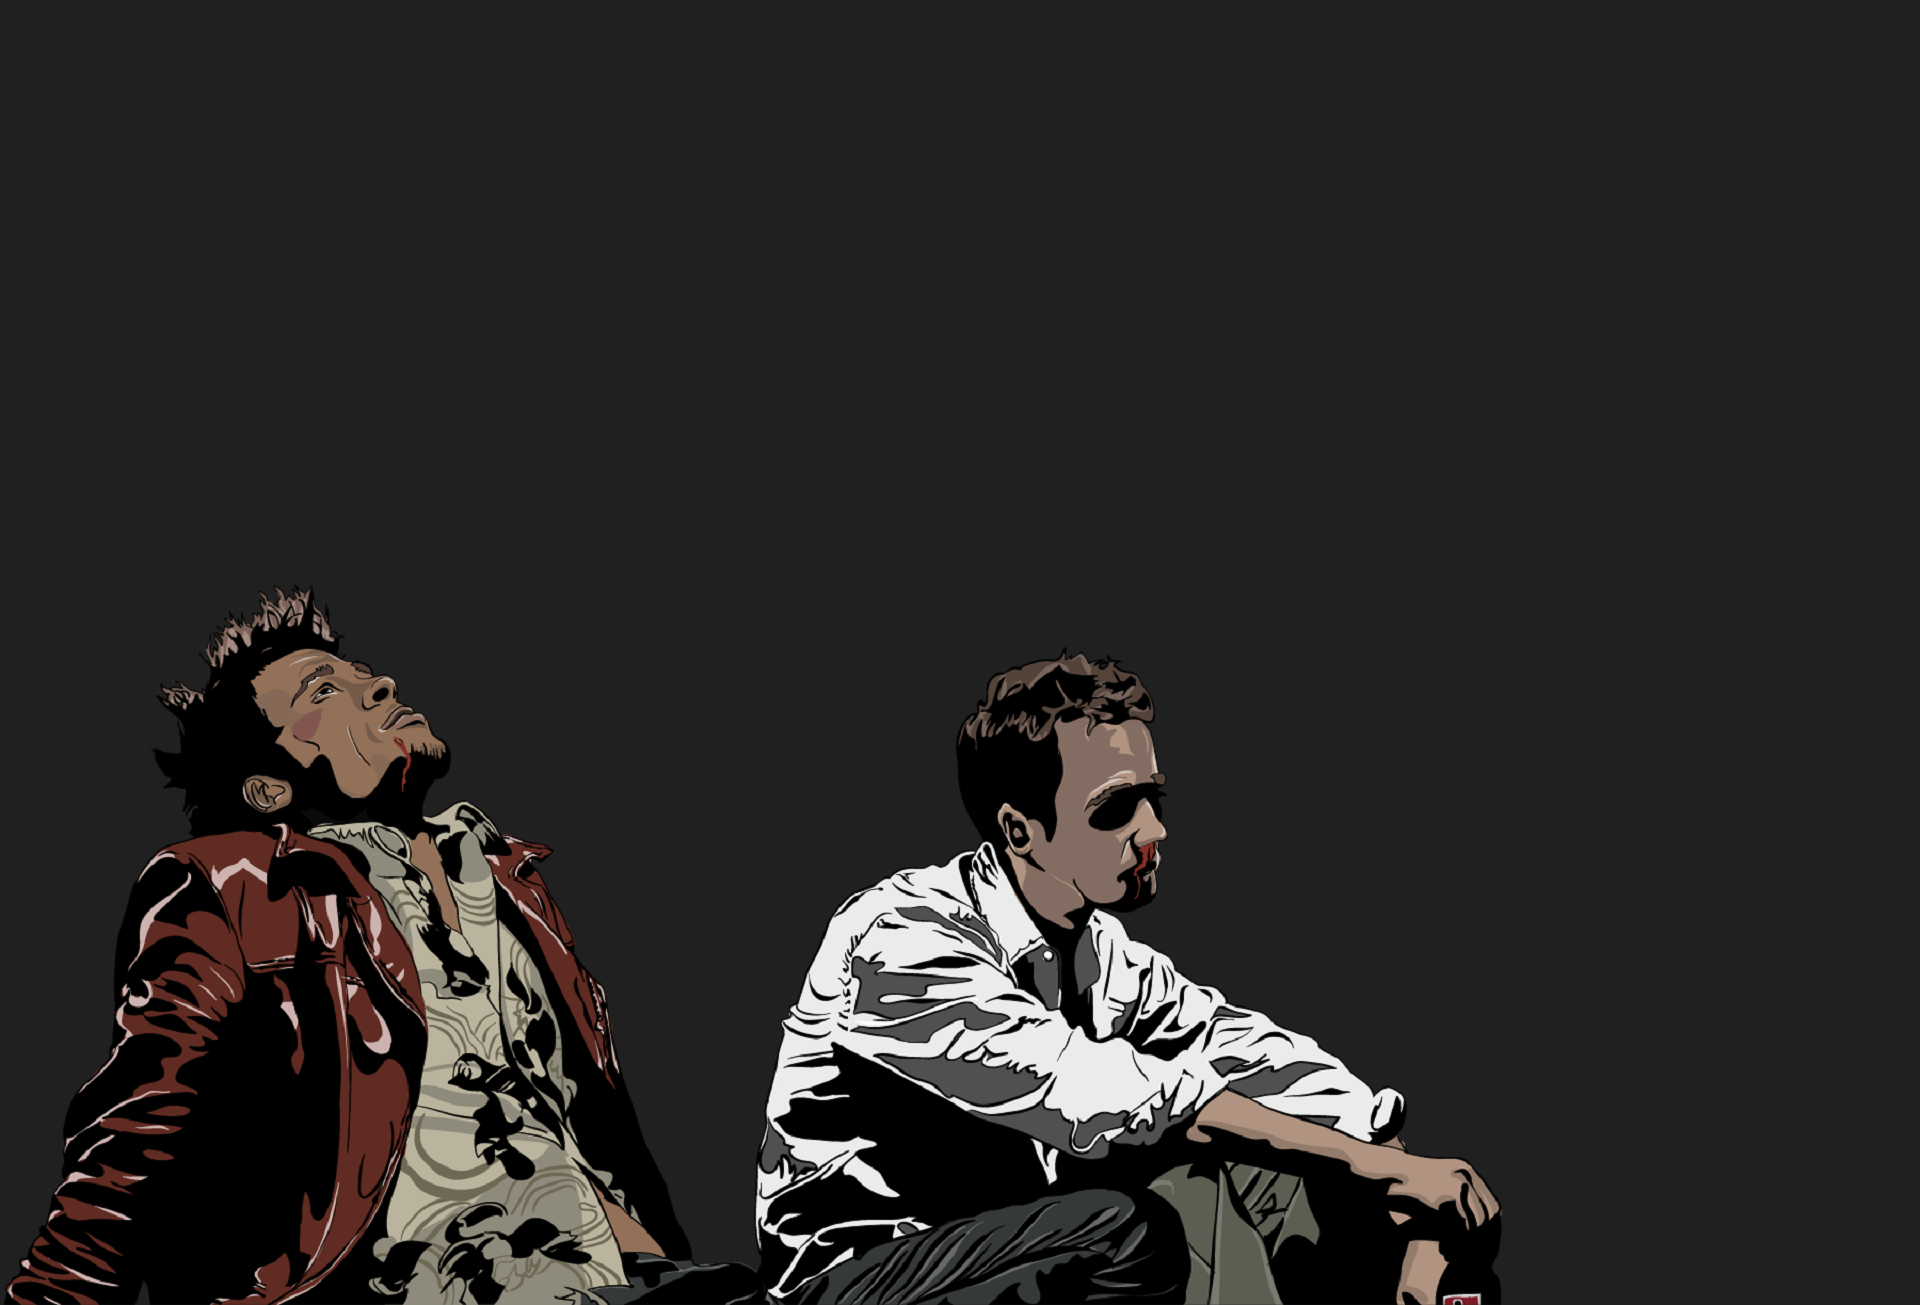 General 1920x1305 Fight Club movies vector simple background black background artwork movie characters book characters Brad Pitt Edward Norton David Fincher actor